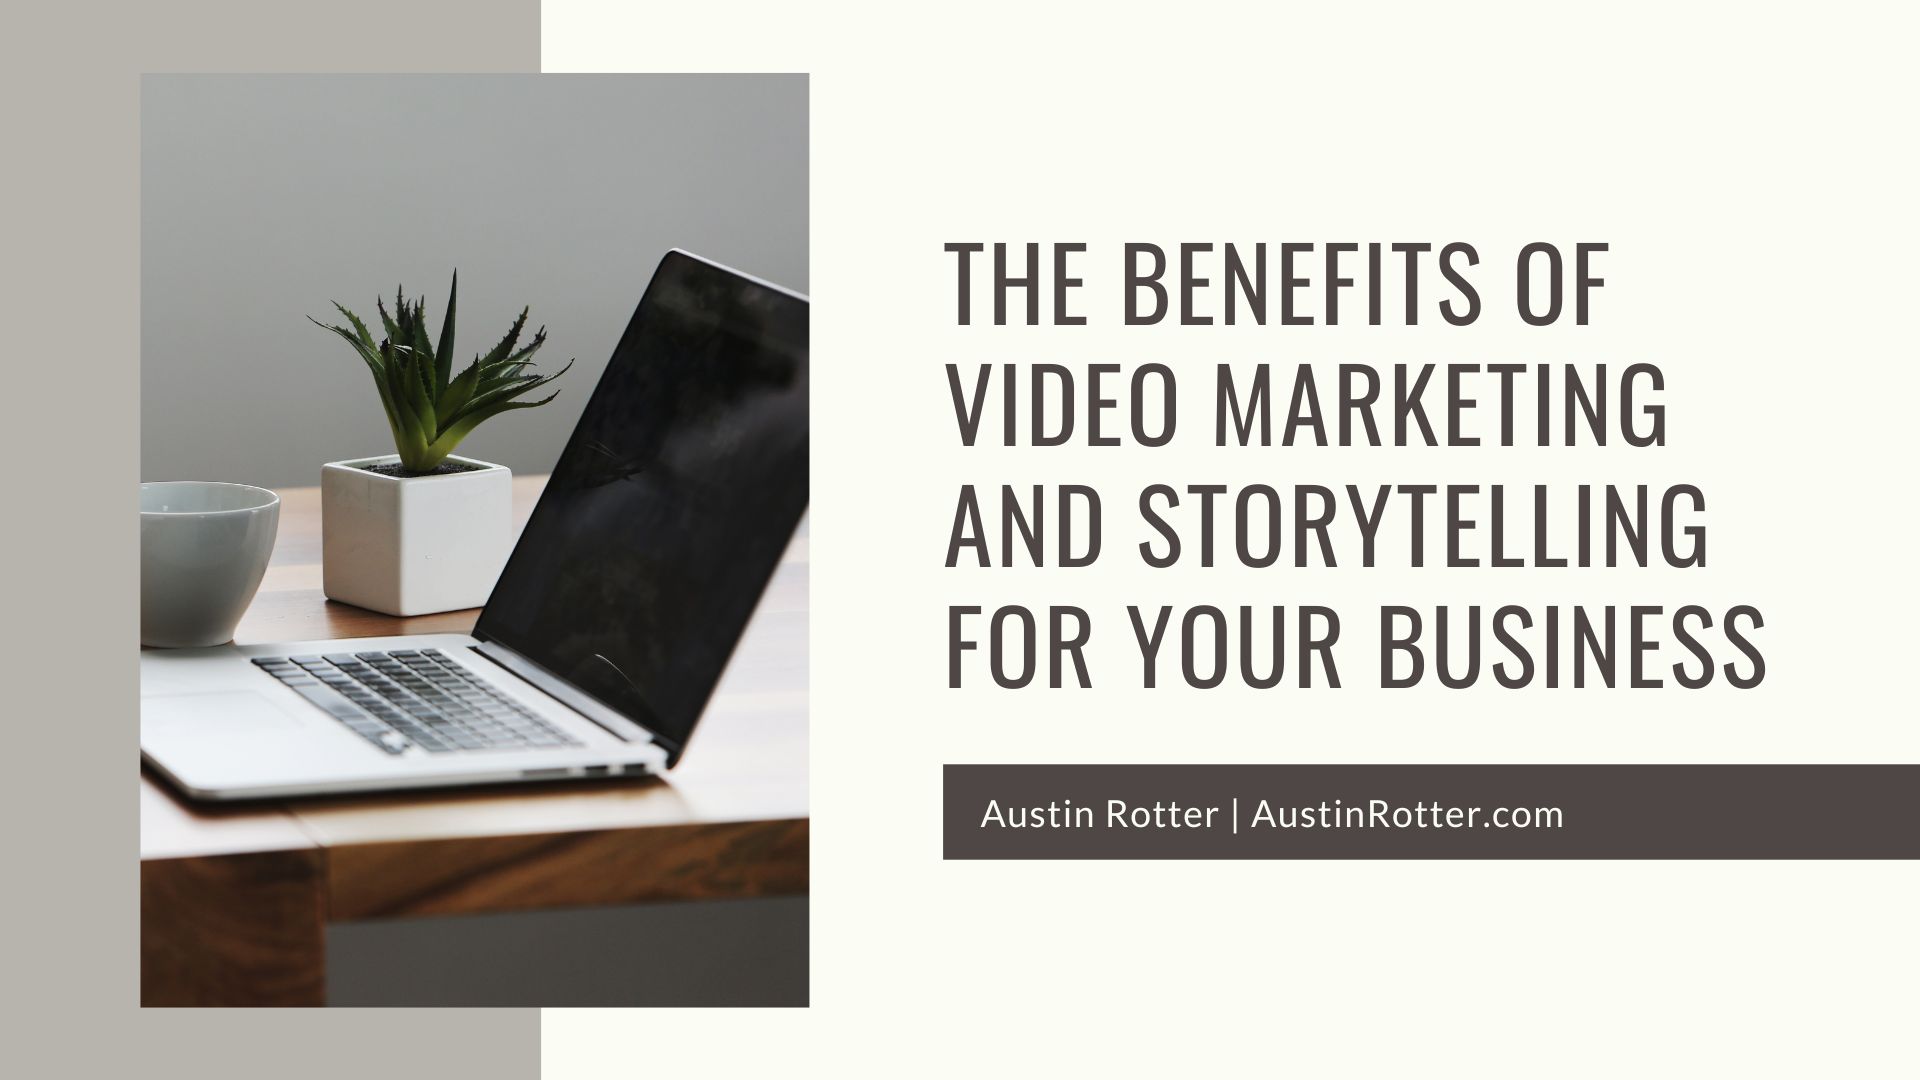 THE BENEFITS OF
VIDEQ MARKETING
AND STORYTELLING
FOR YOUR BUSINESS